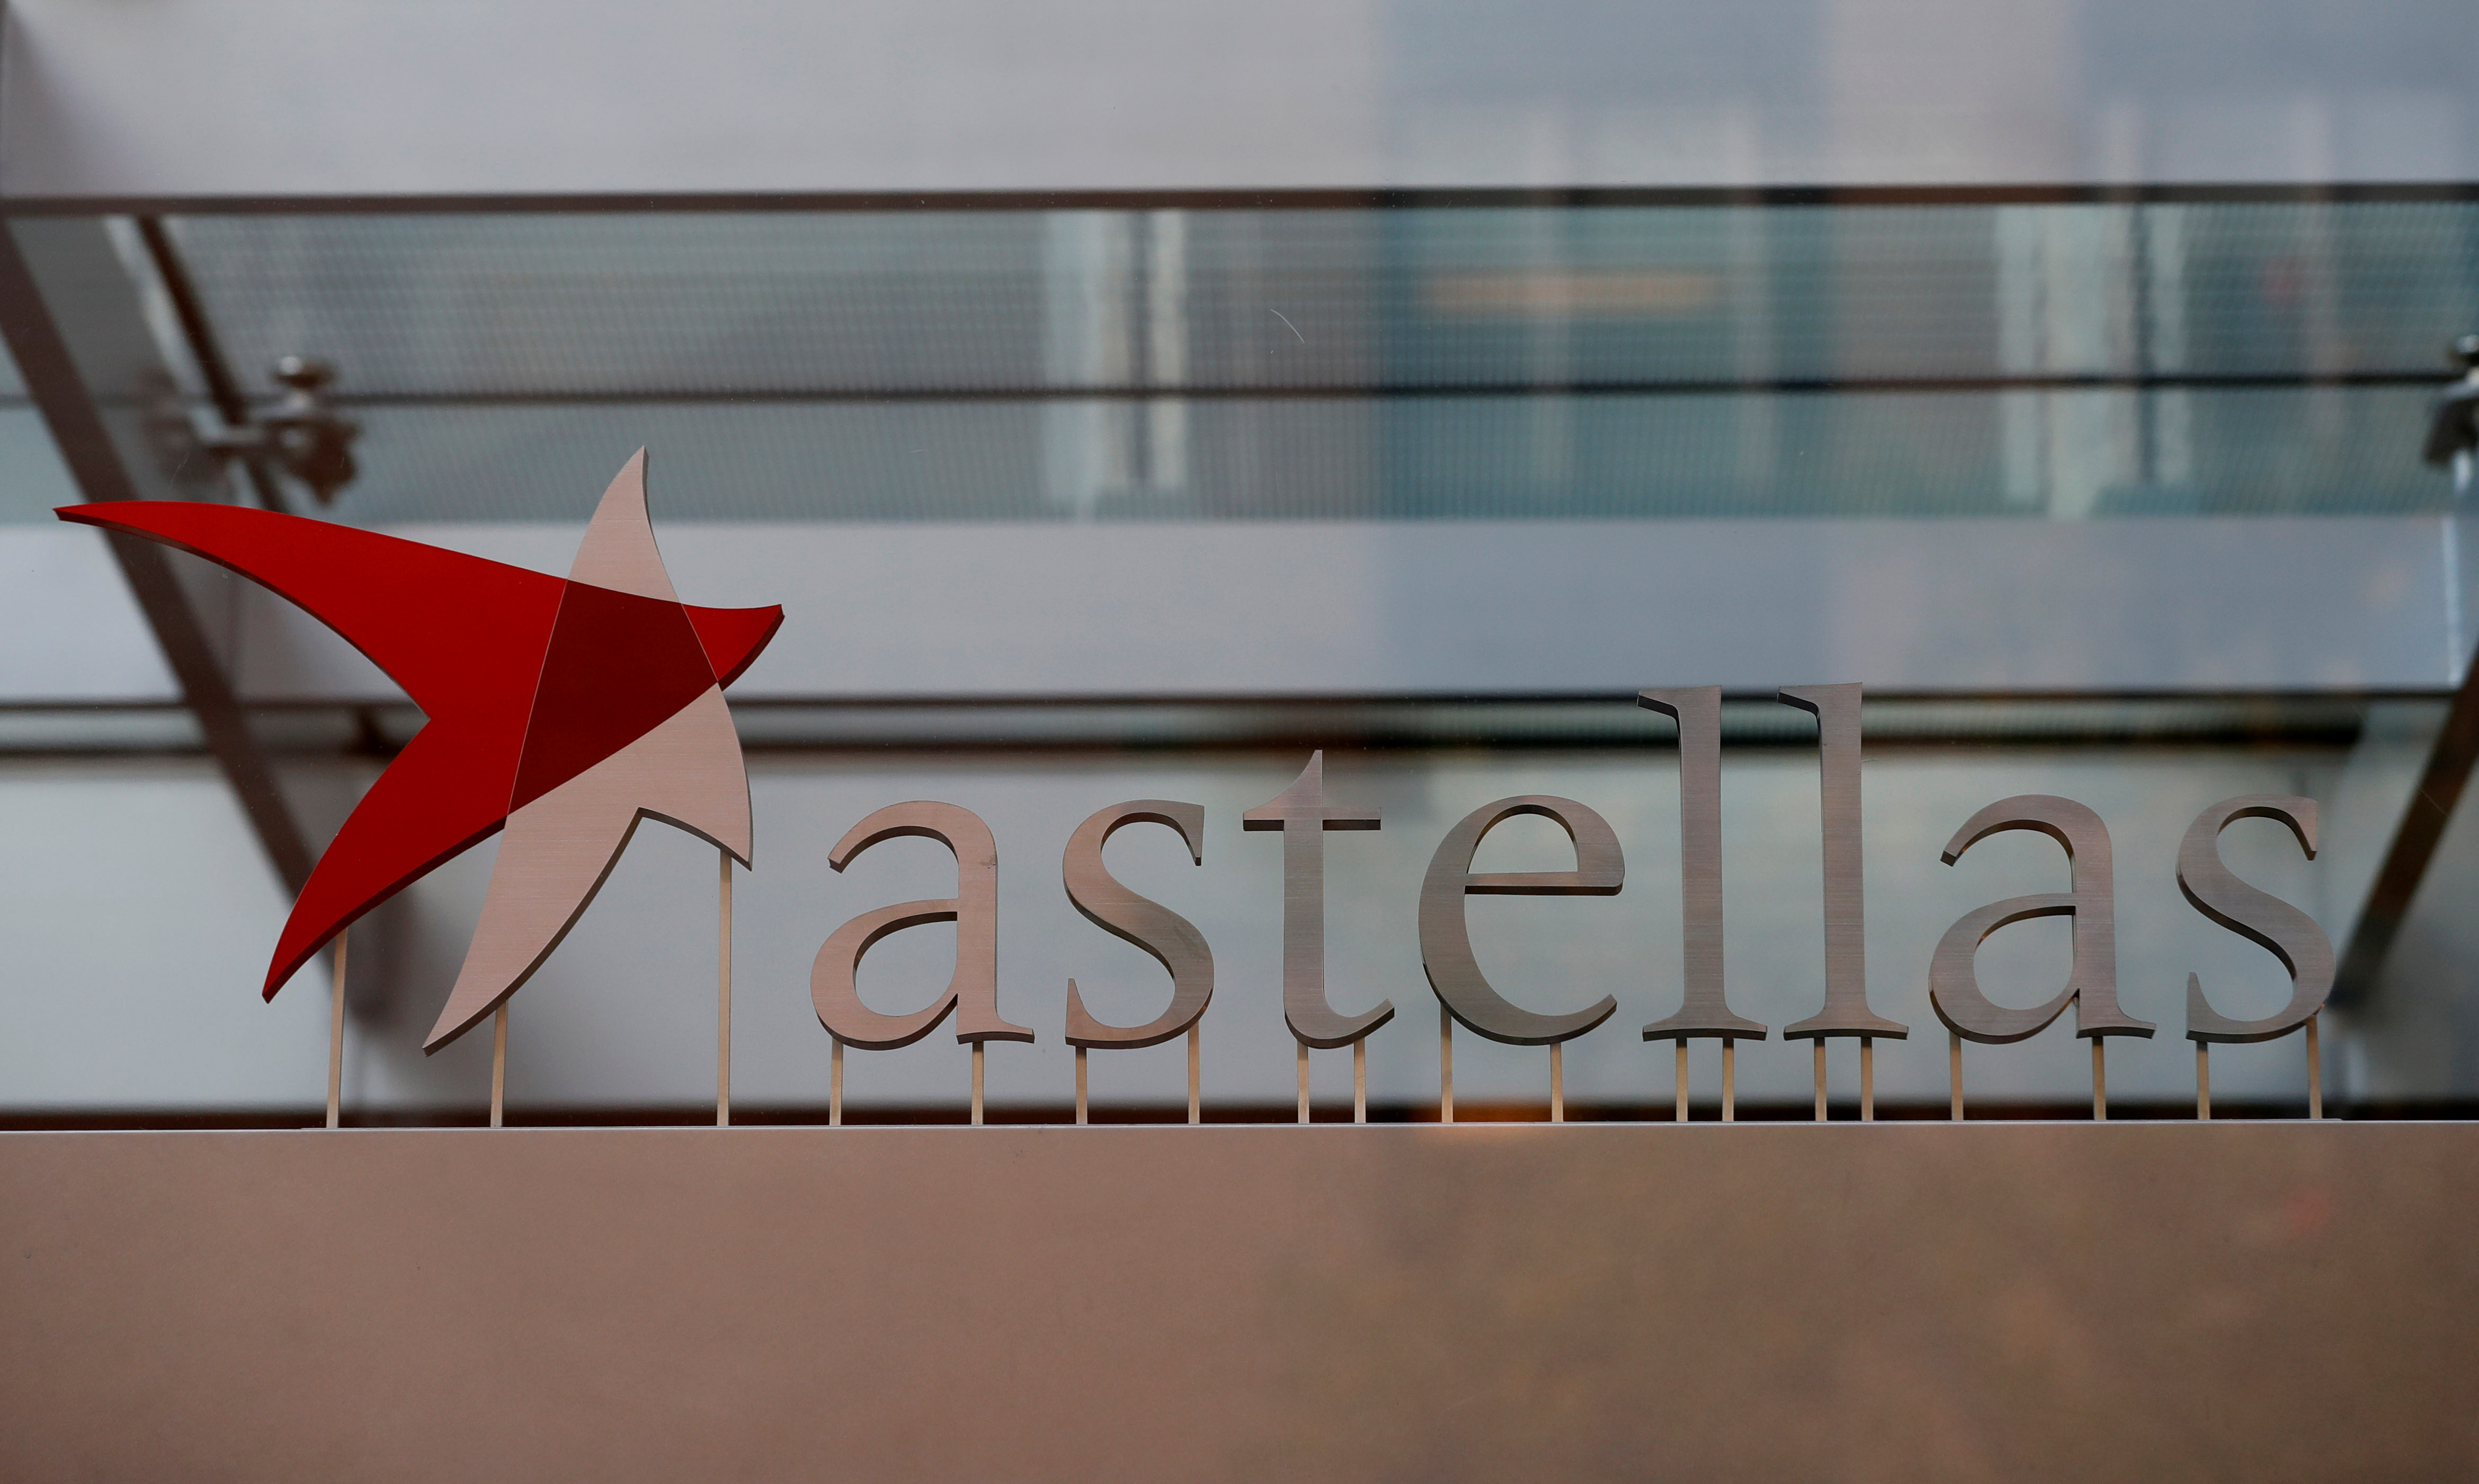 Astellas Pharma's logo is pictured at its headquarters in Tokyo